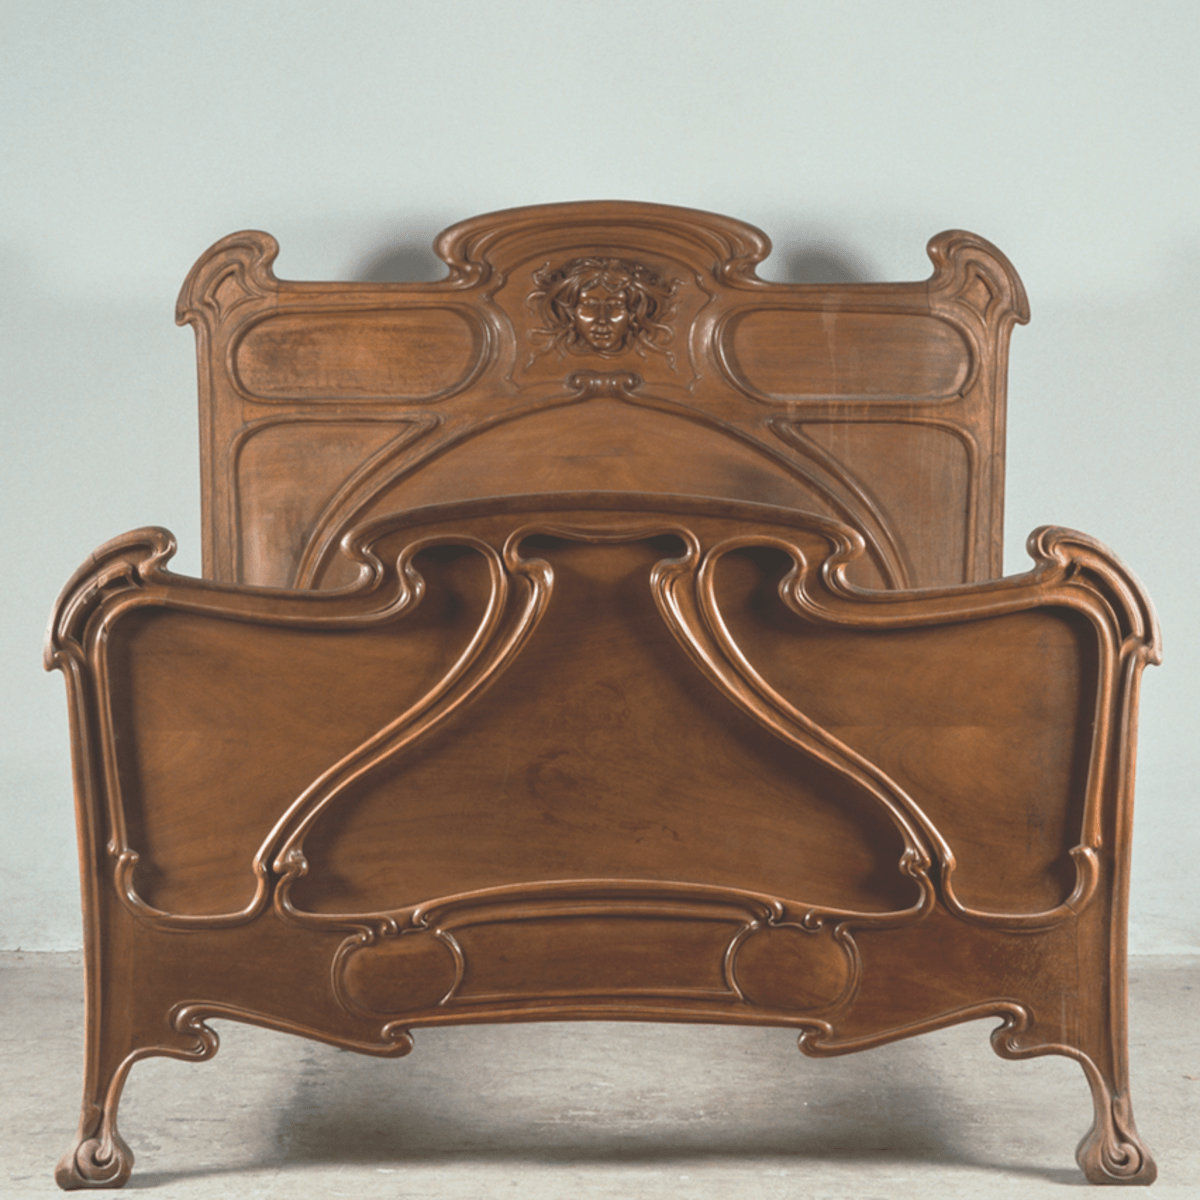 9 Antique Furniture Styles Straight Out of Britain • English